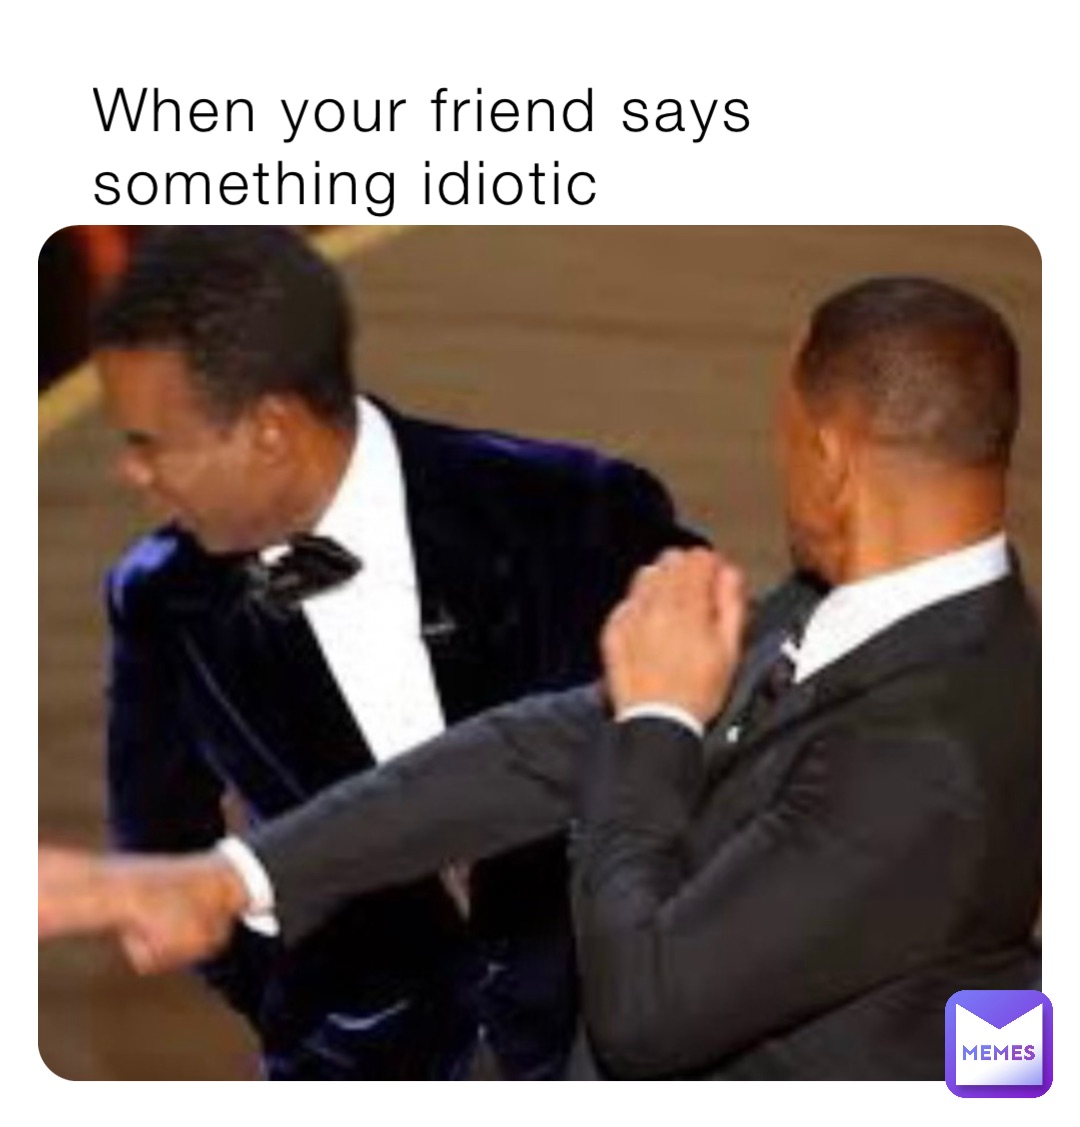 When your friend says something idiotic